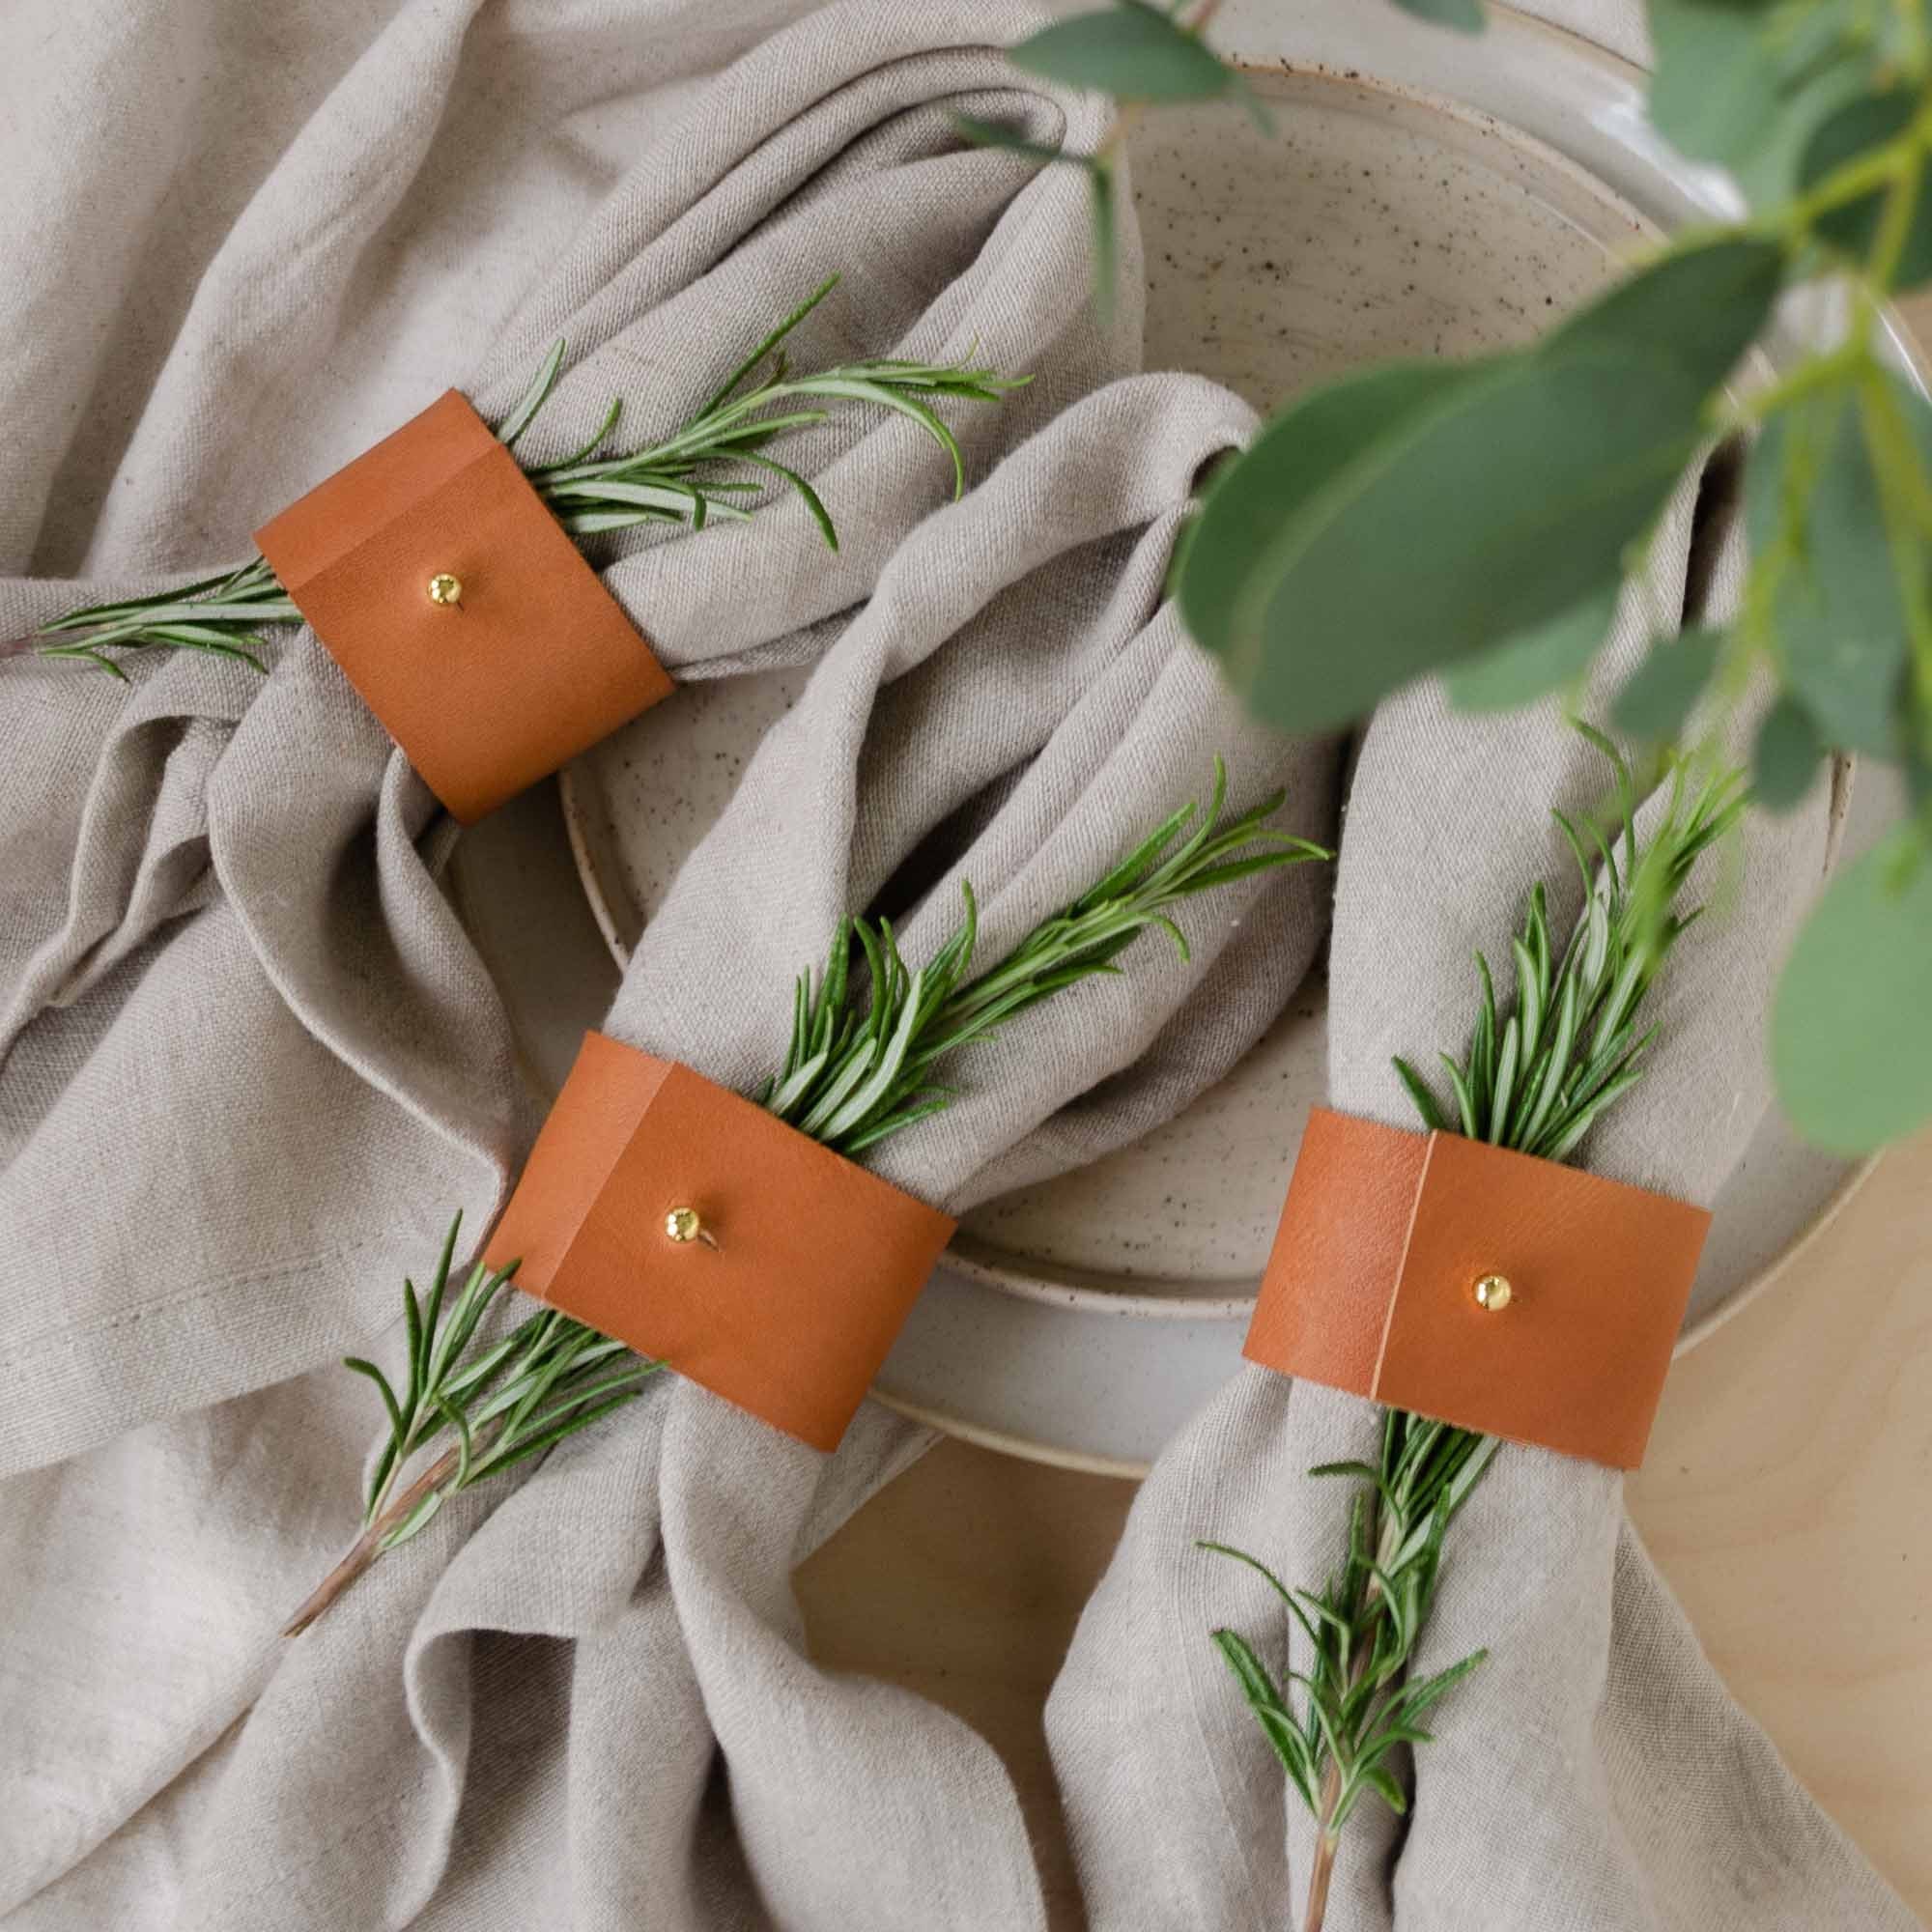 Leather Napkin Ring in Tan Brown Cow Hide For Wedding Table, Alfresco Dining, Outdoor Dining Table Setting